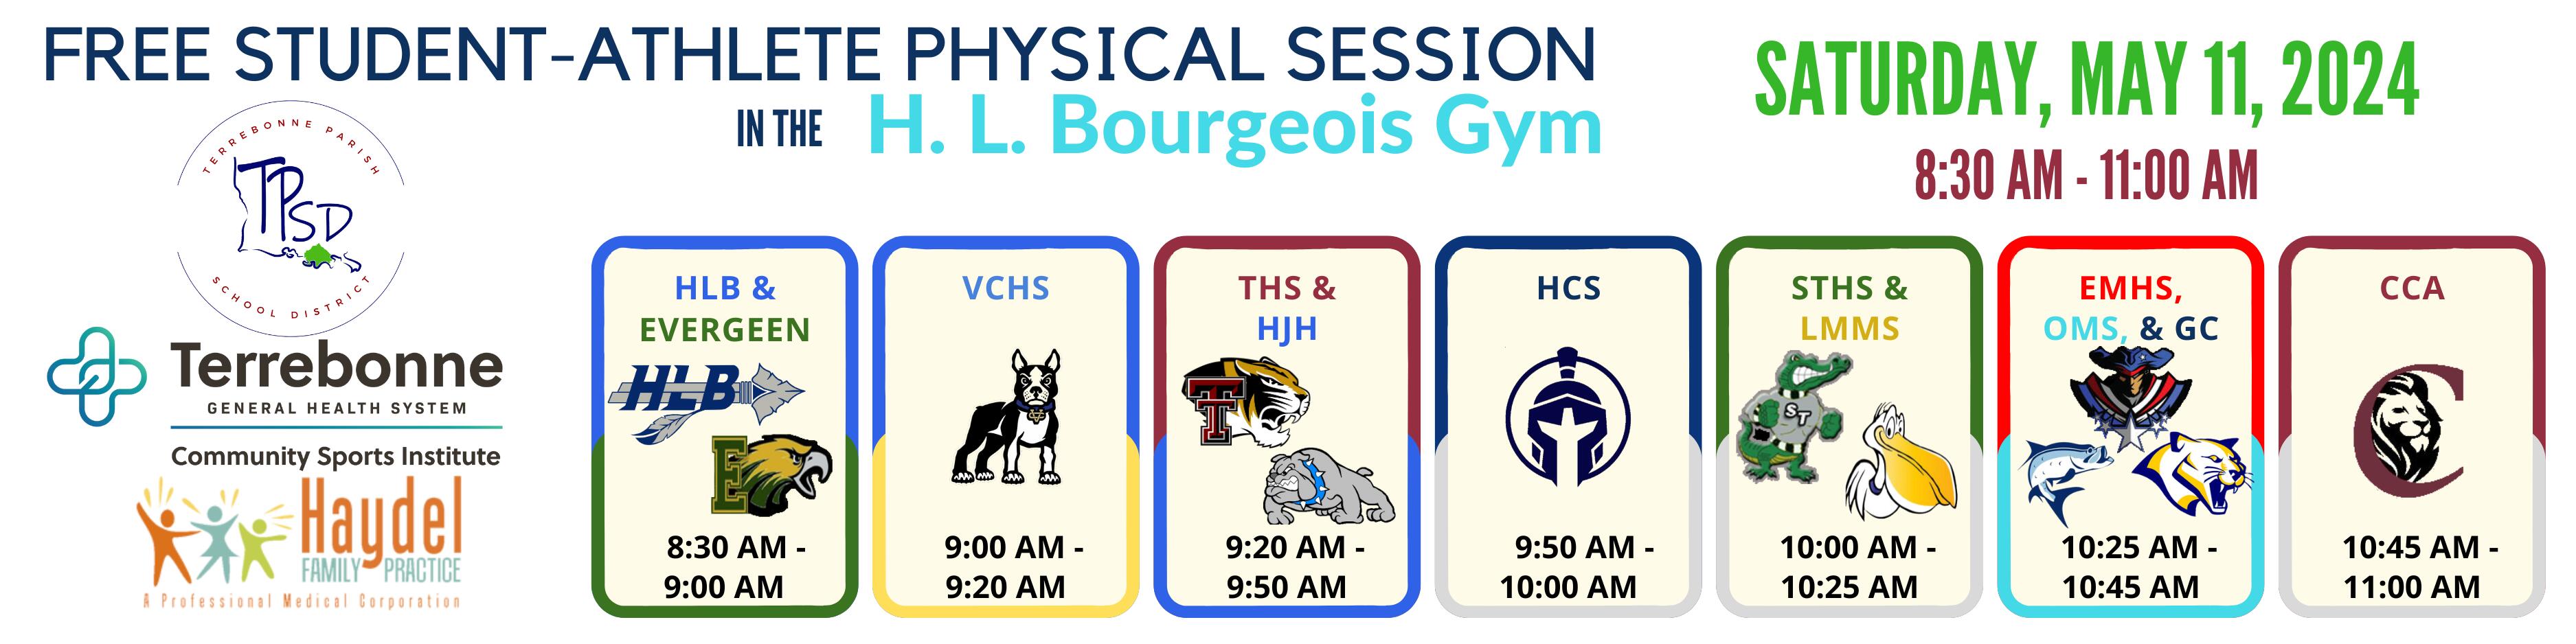 Free Student-Athlete Physical Session